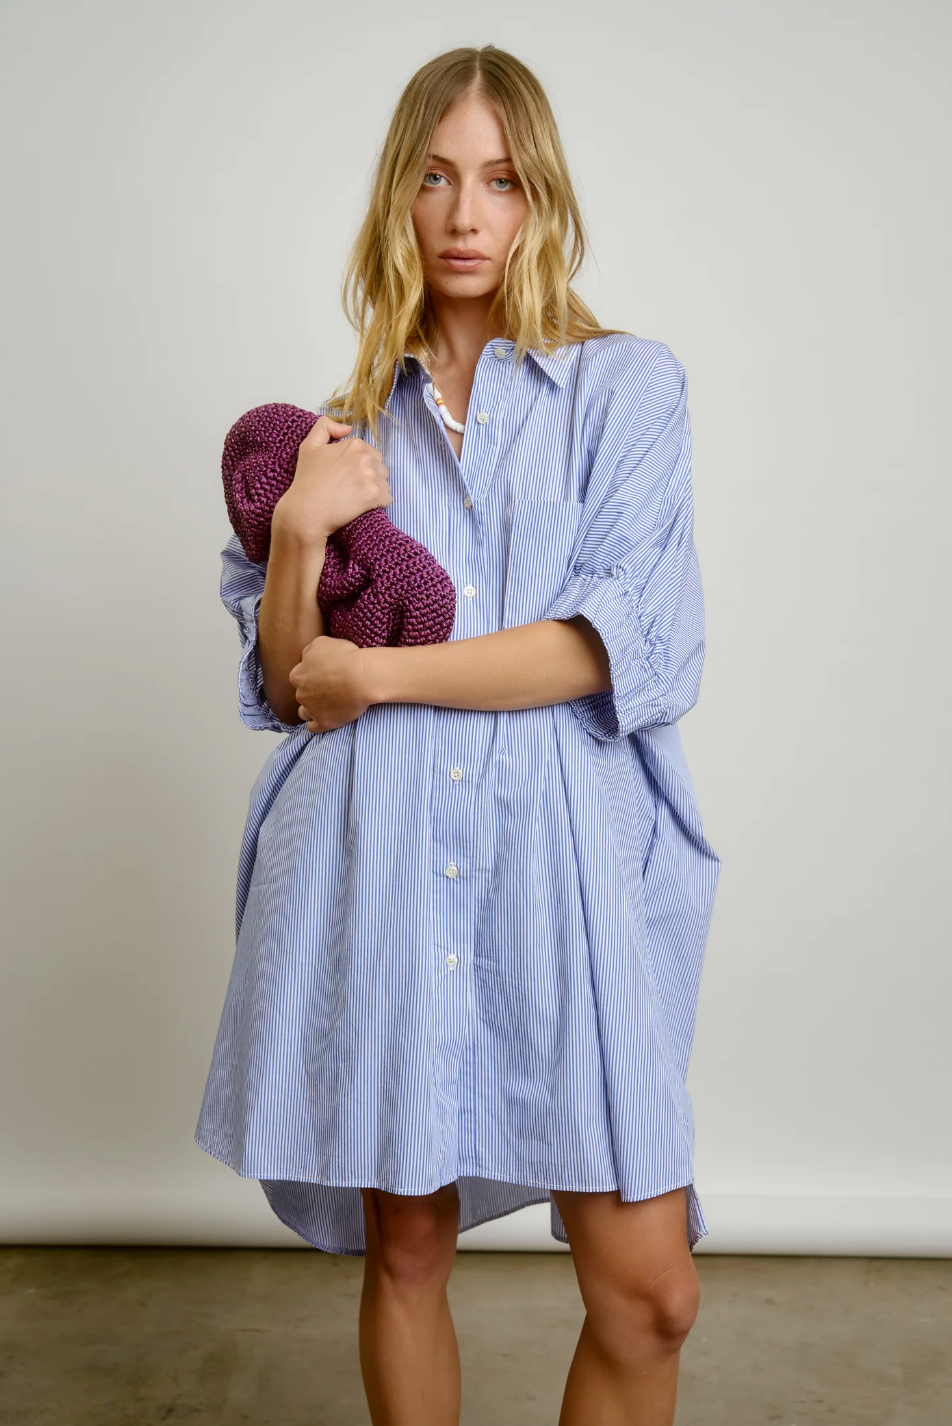 A woman with blonde hair stands holding a purple knitted hat, dressed in a light blue striped Le Shirt dress in front of a neutral background in her Scottsdale, Arizona bungalow by Aquarius Cocktail.